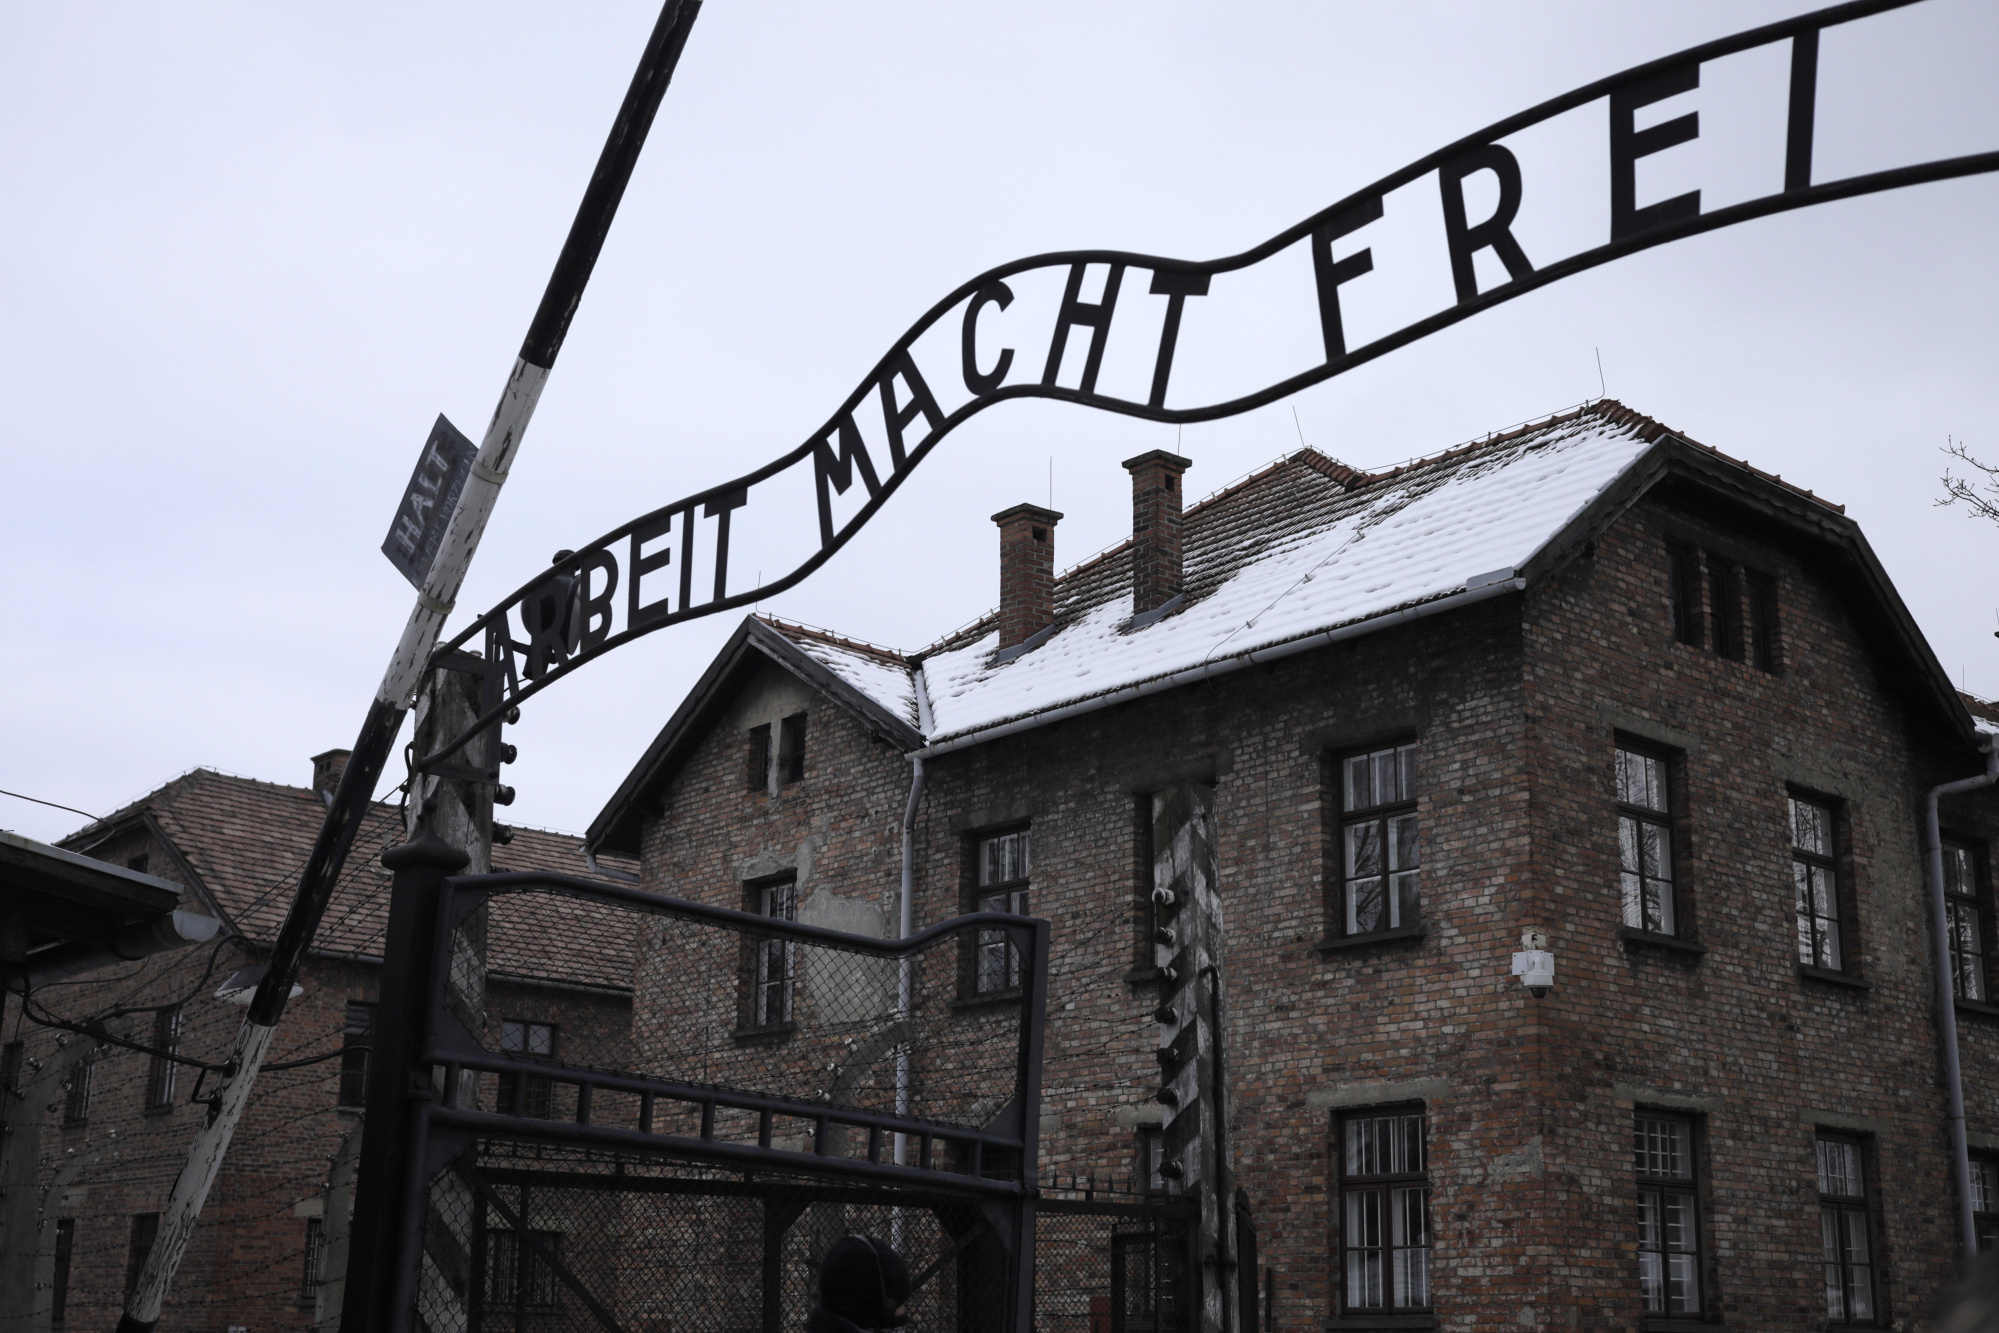 The infamous&nbsp;inscription sits above the main gate at the Auschwitz concentration camp.